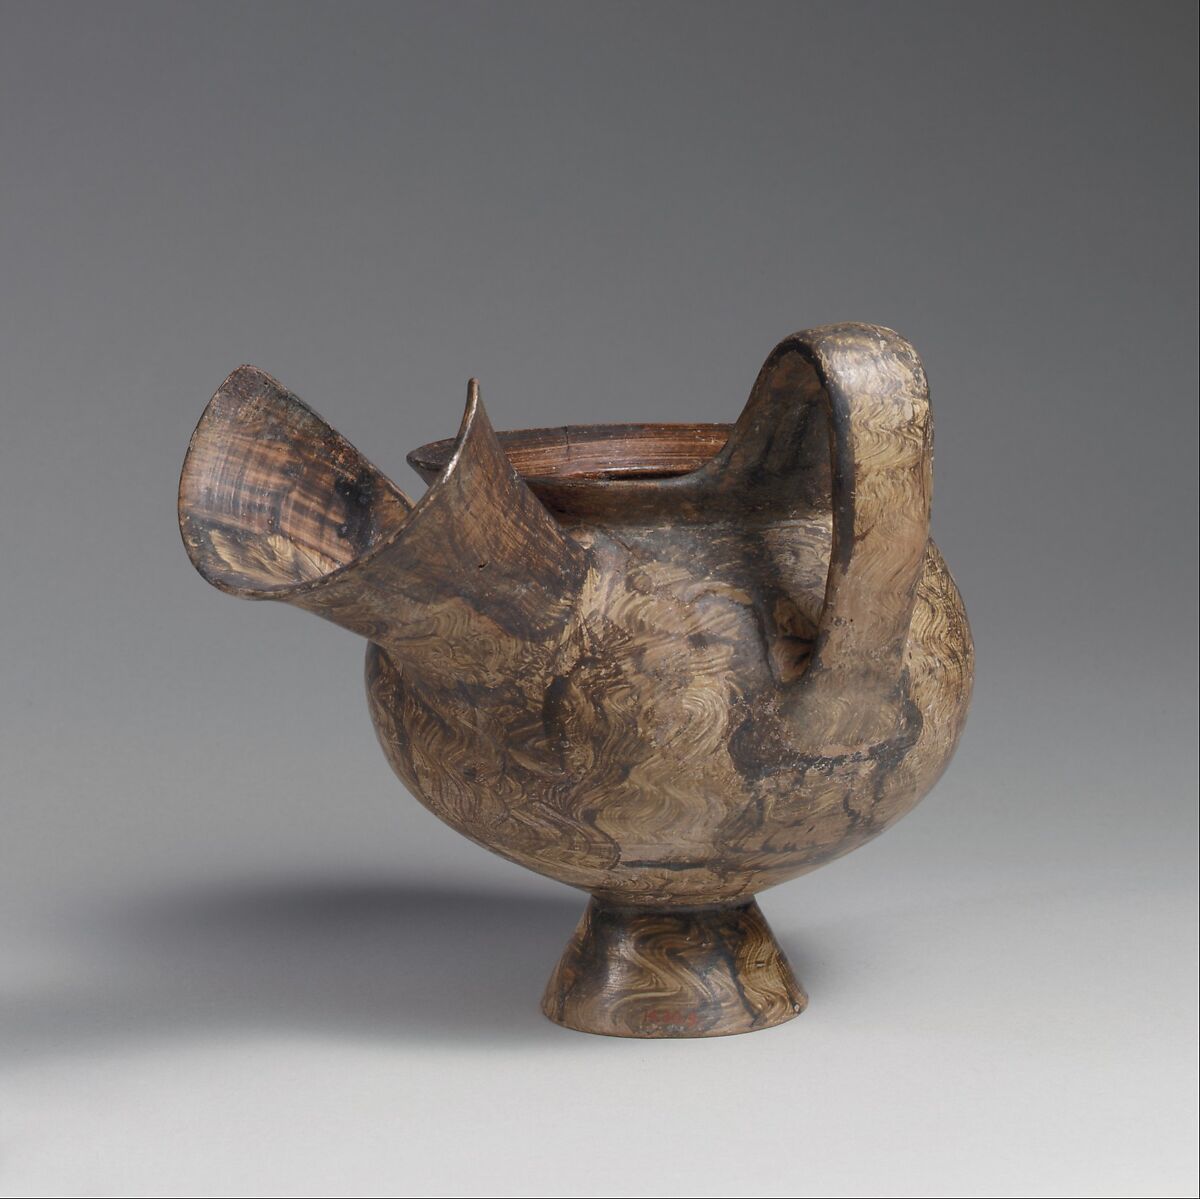 Terracotta jug with an oversize spout, Terracotta, Lydian 